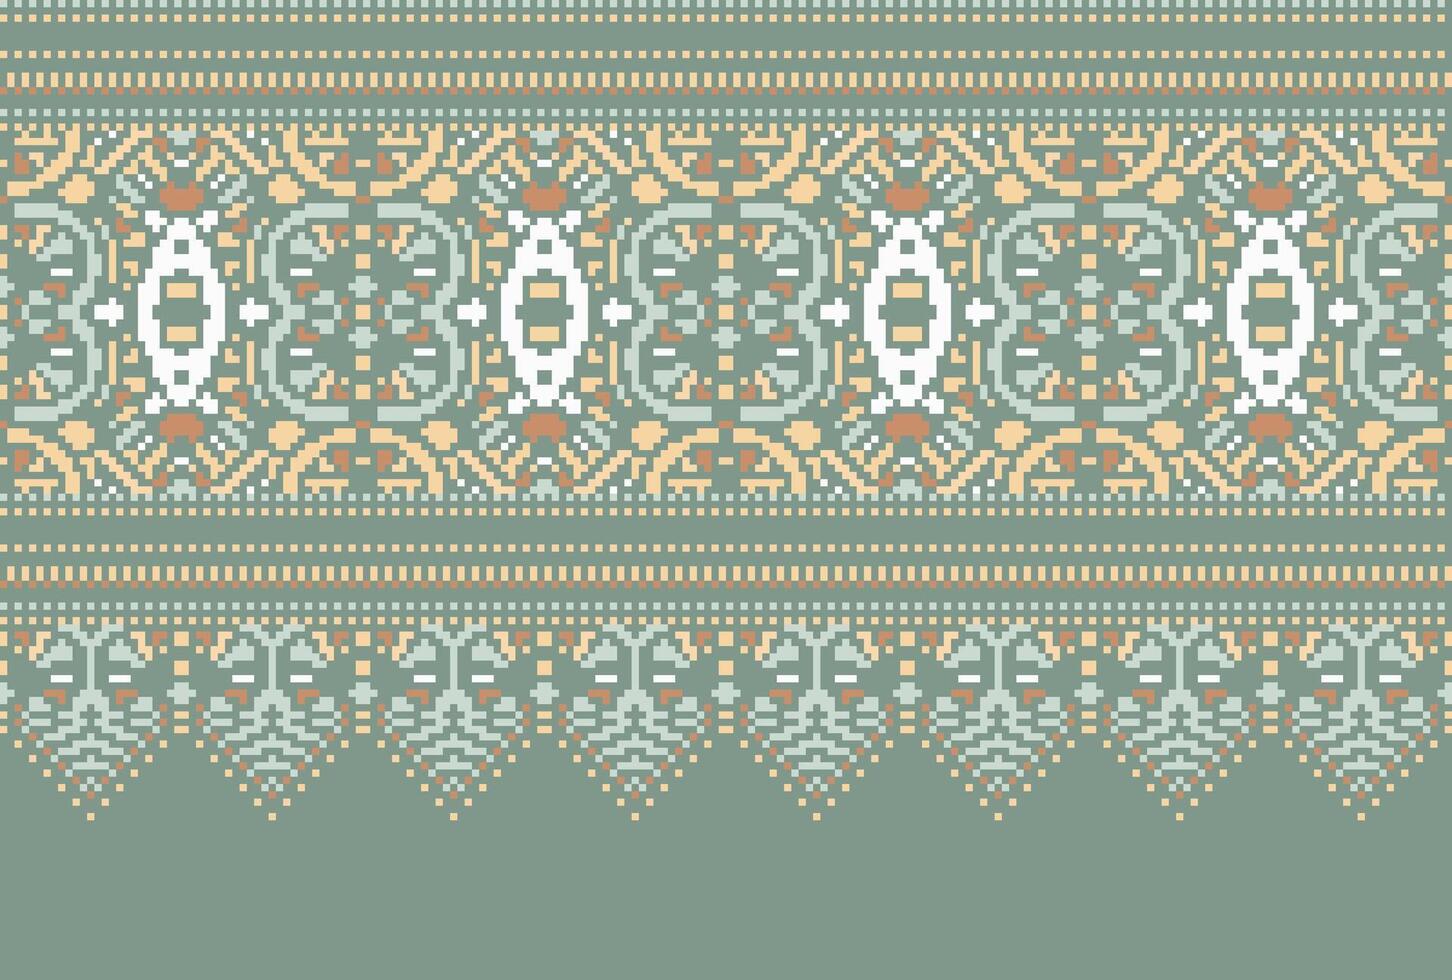 cross stitch Embroidery ethnic pattern, Vector Geometric ornate background, Cross stitch retro zigzag style, Blue and yellow pattern knitting continuous, Design for textile, fabric, digital print